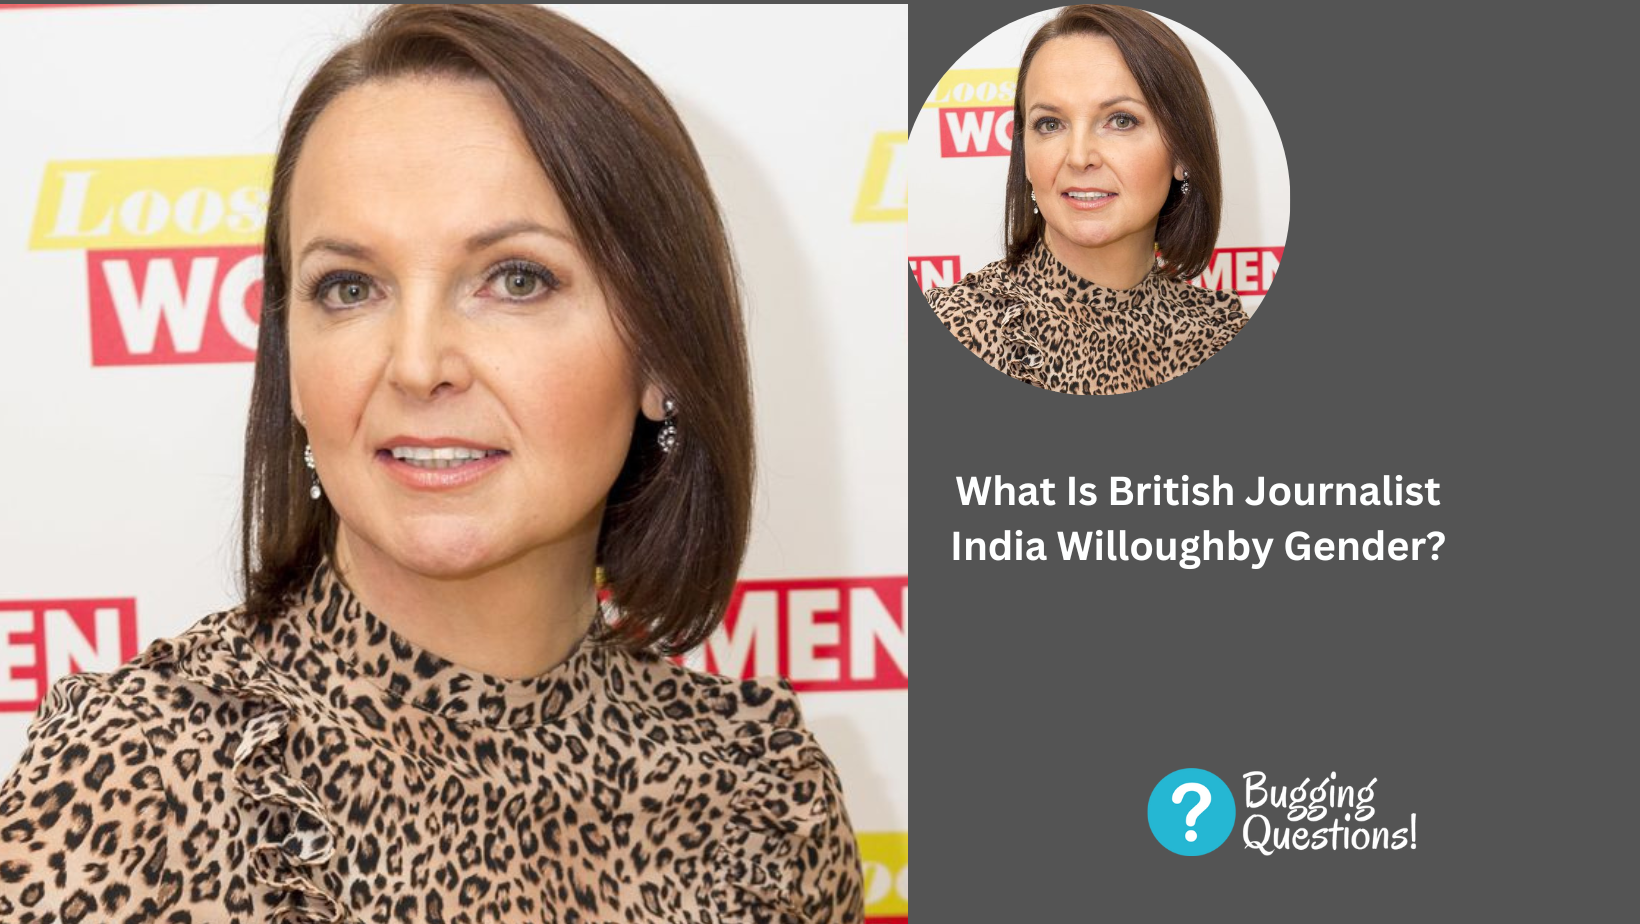 What Is British Journalist India Willoughby Gender?